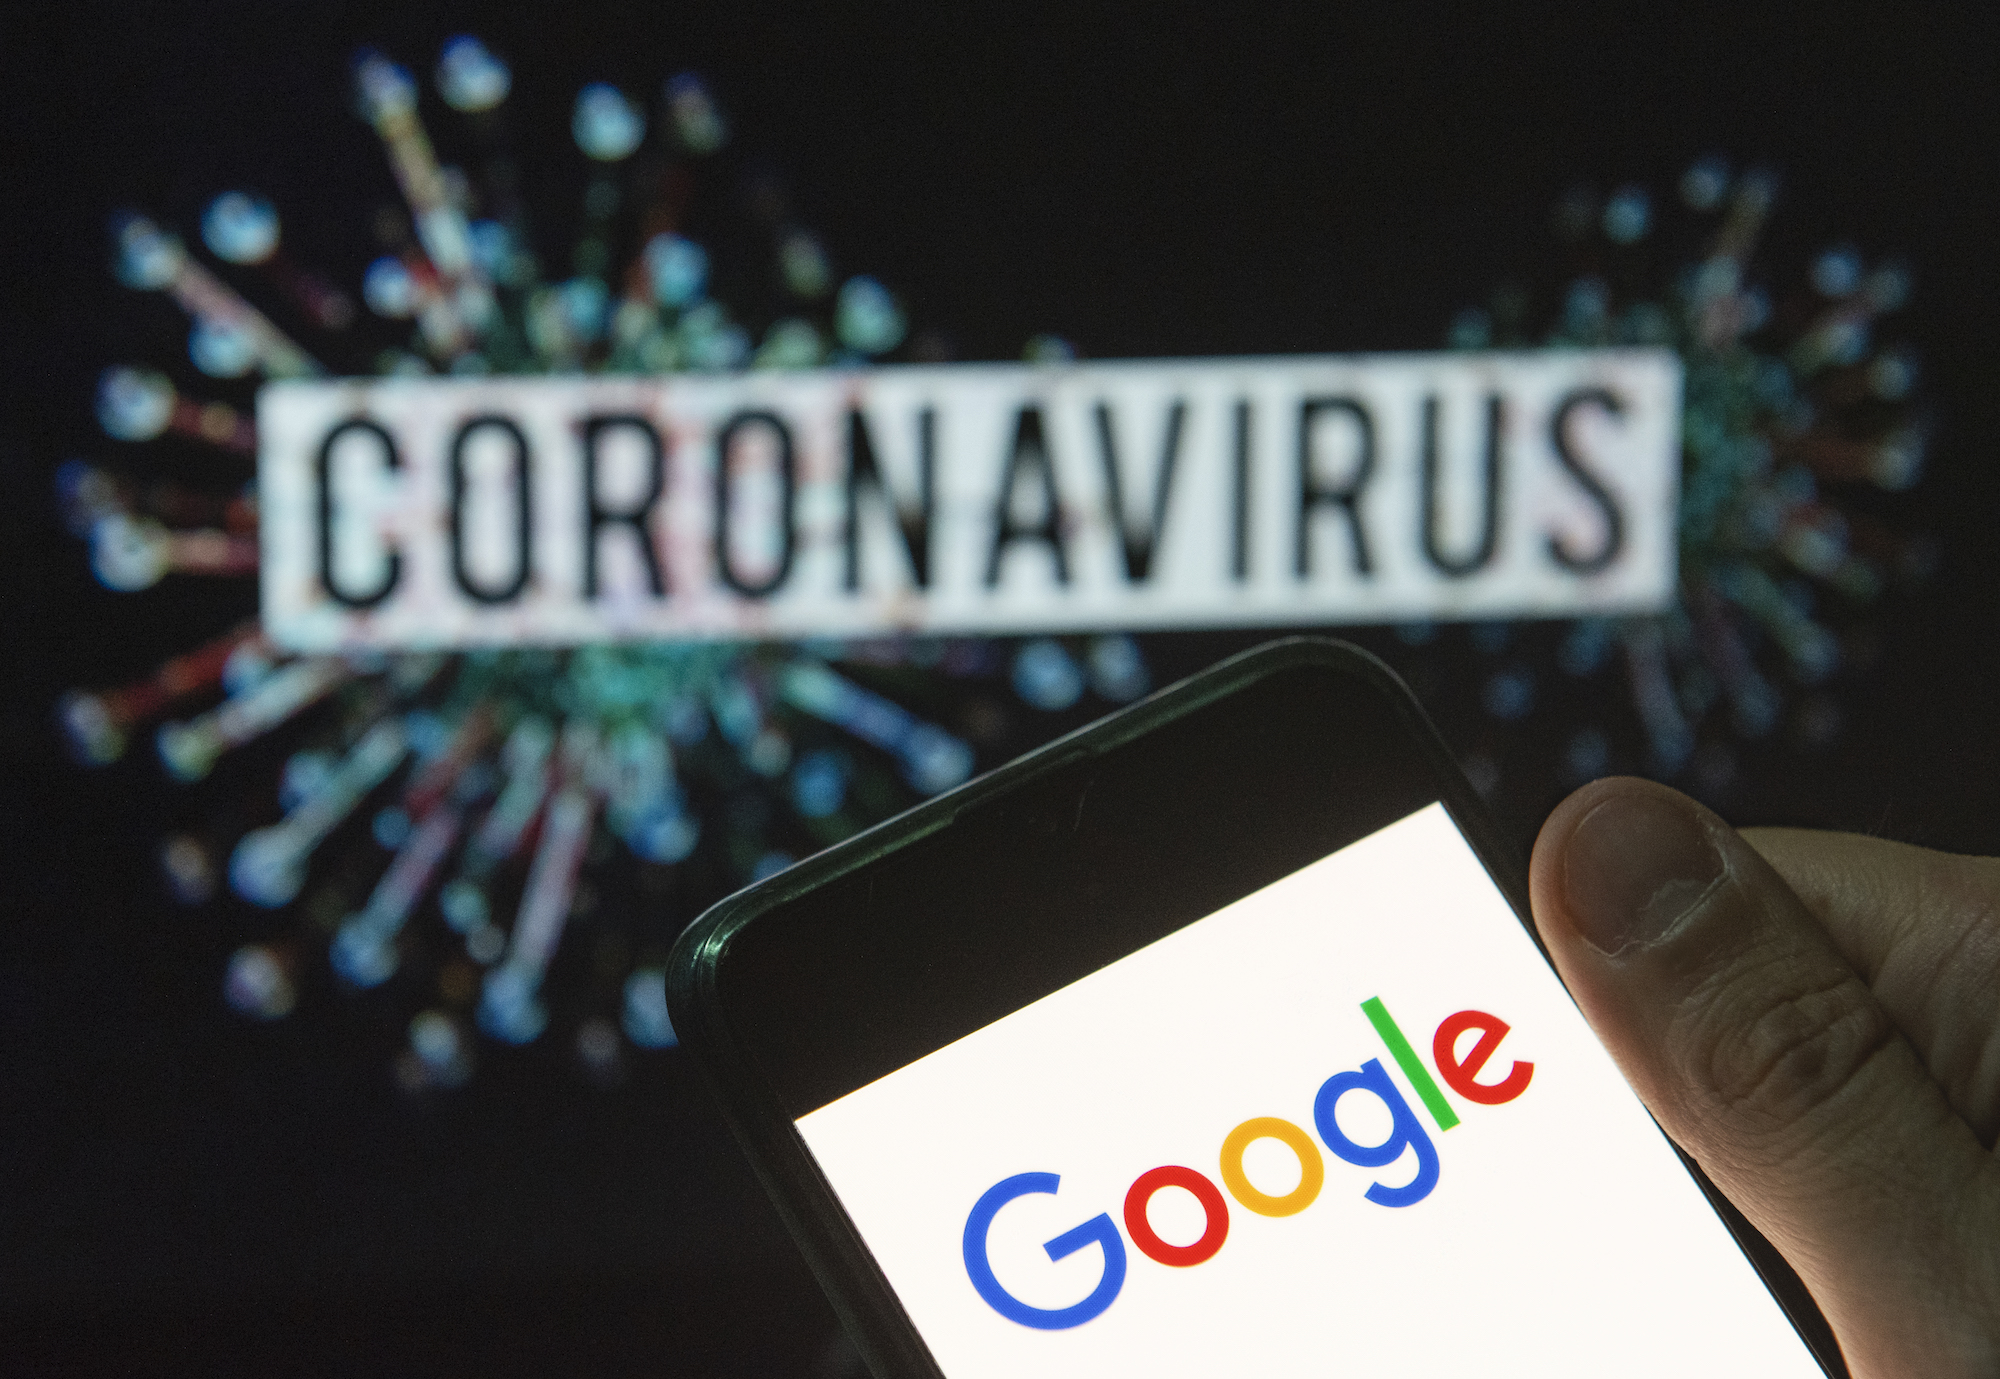 Apple and Google discharge telephone innovation to inform clients of coronavirus introduction